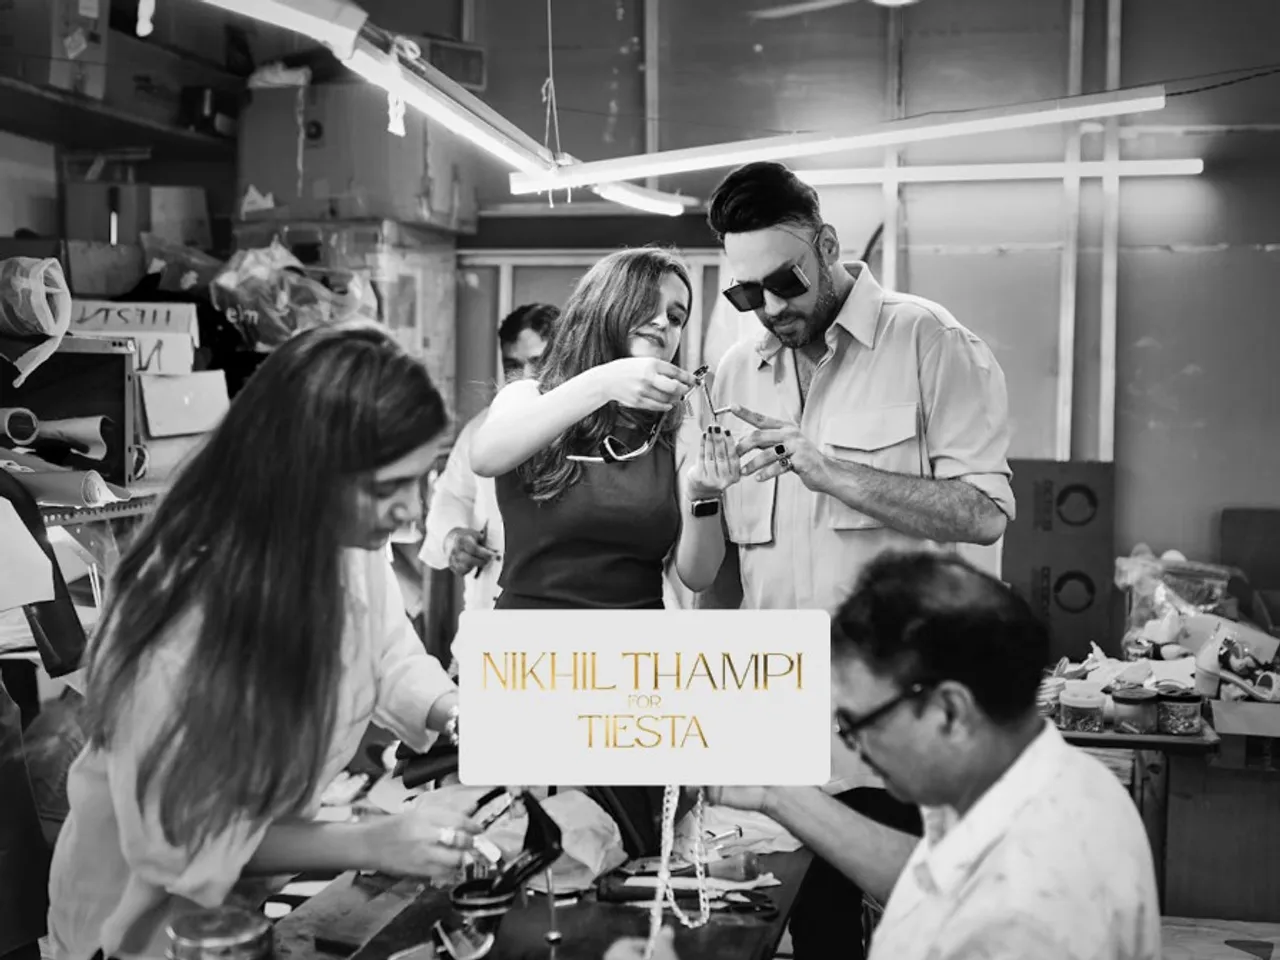 Tiesta and designer Nikhil Thampi partner to redefine Ethical Fashion with Luxury Footwear